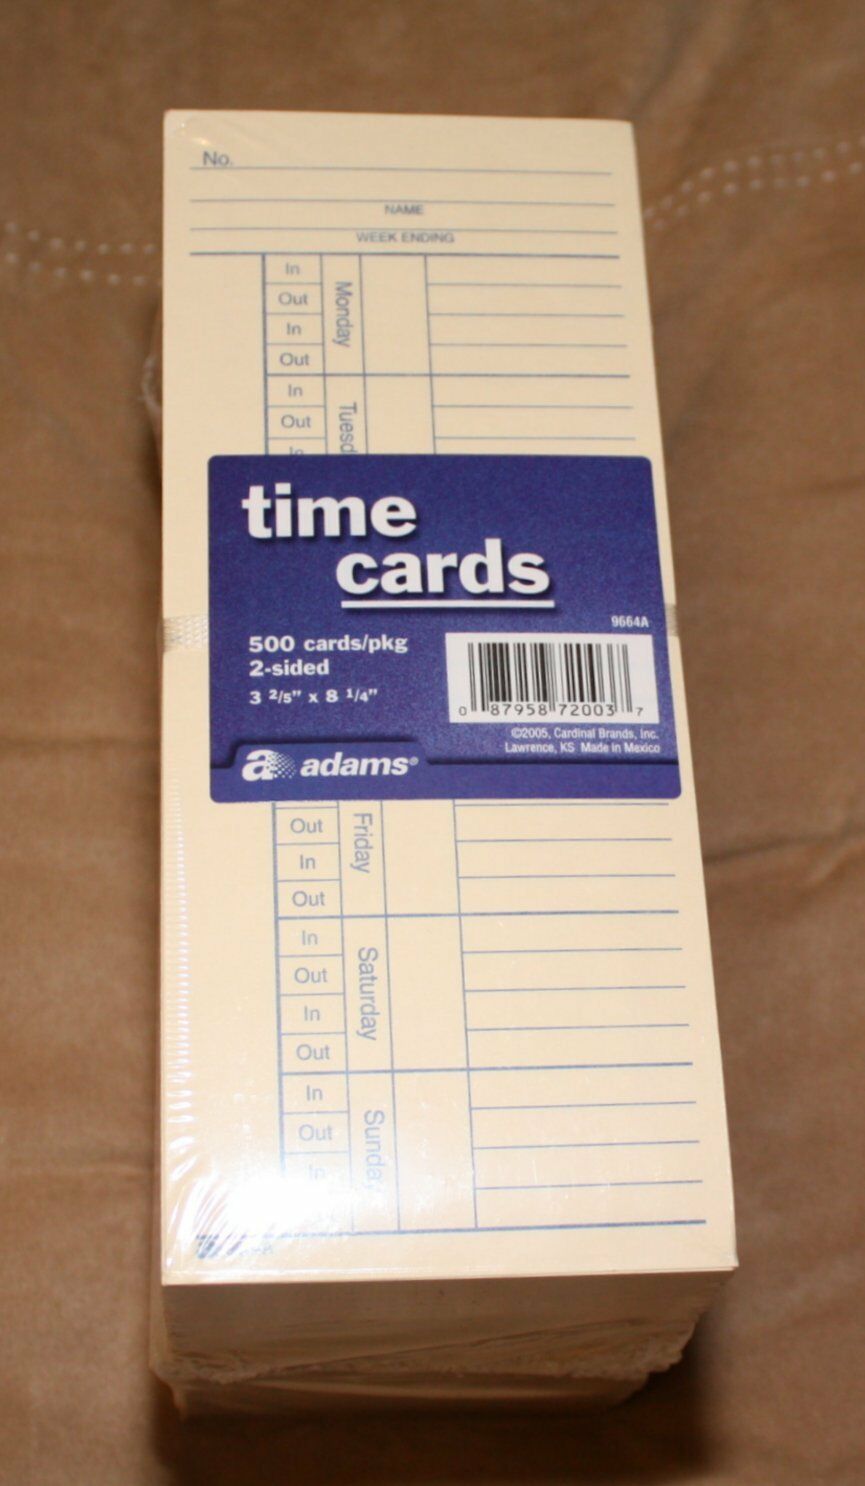 500 Ct Time Cards Punch Employee Payroll Amano Clock 2 Sided Adams 9664a New